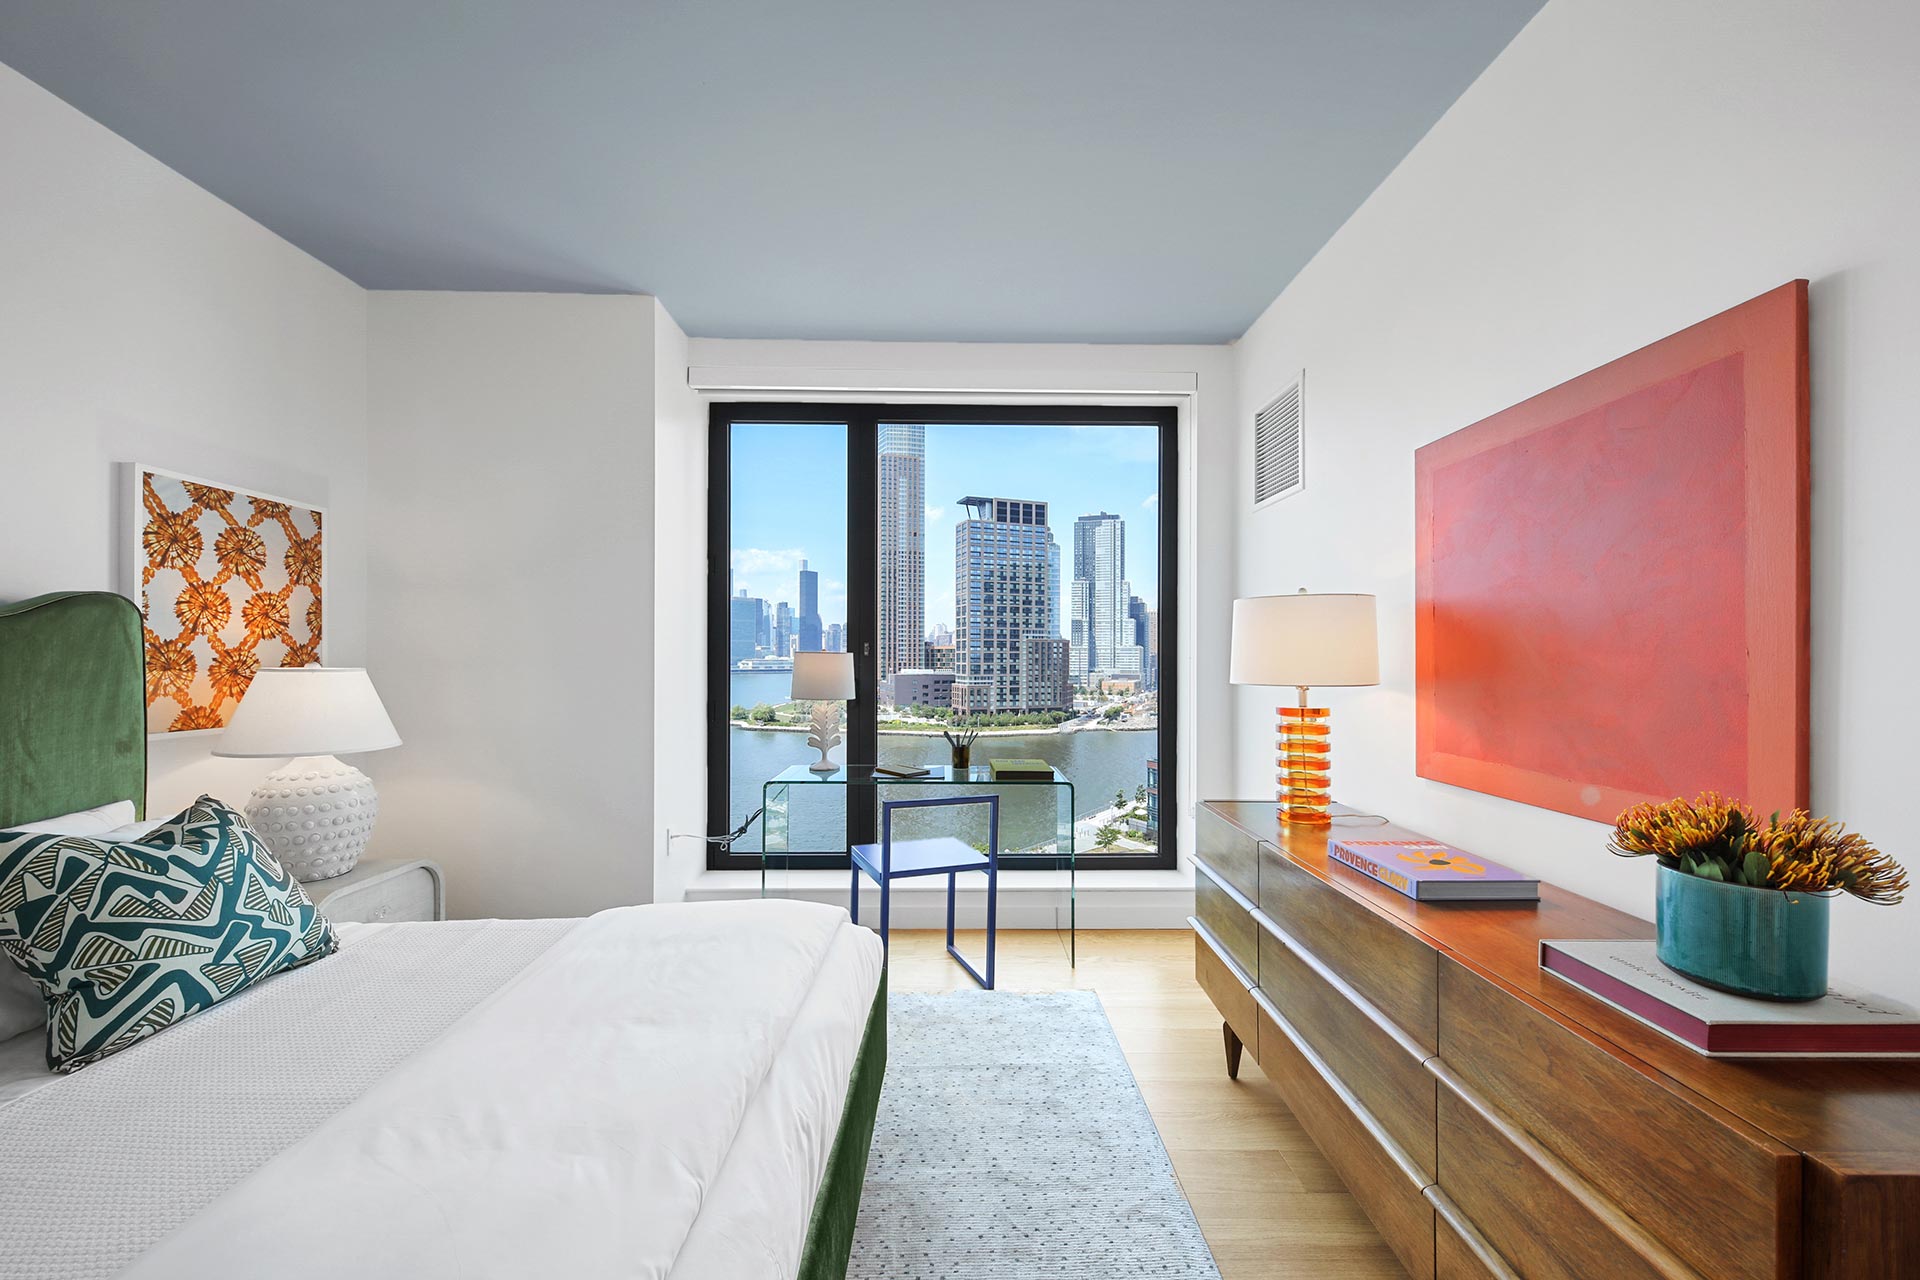 City-view bedroom with a contemporary design